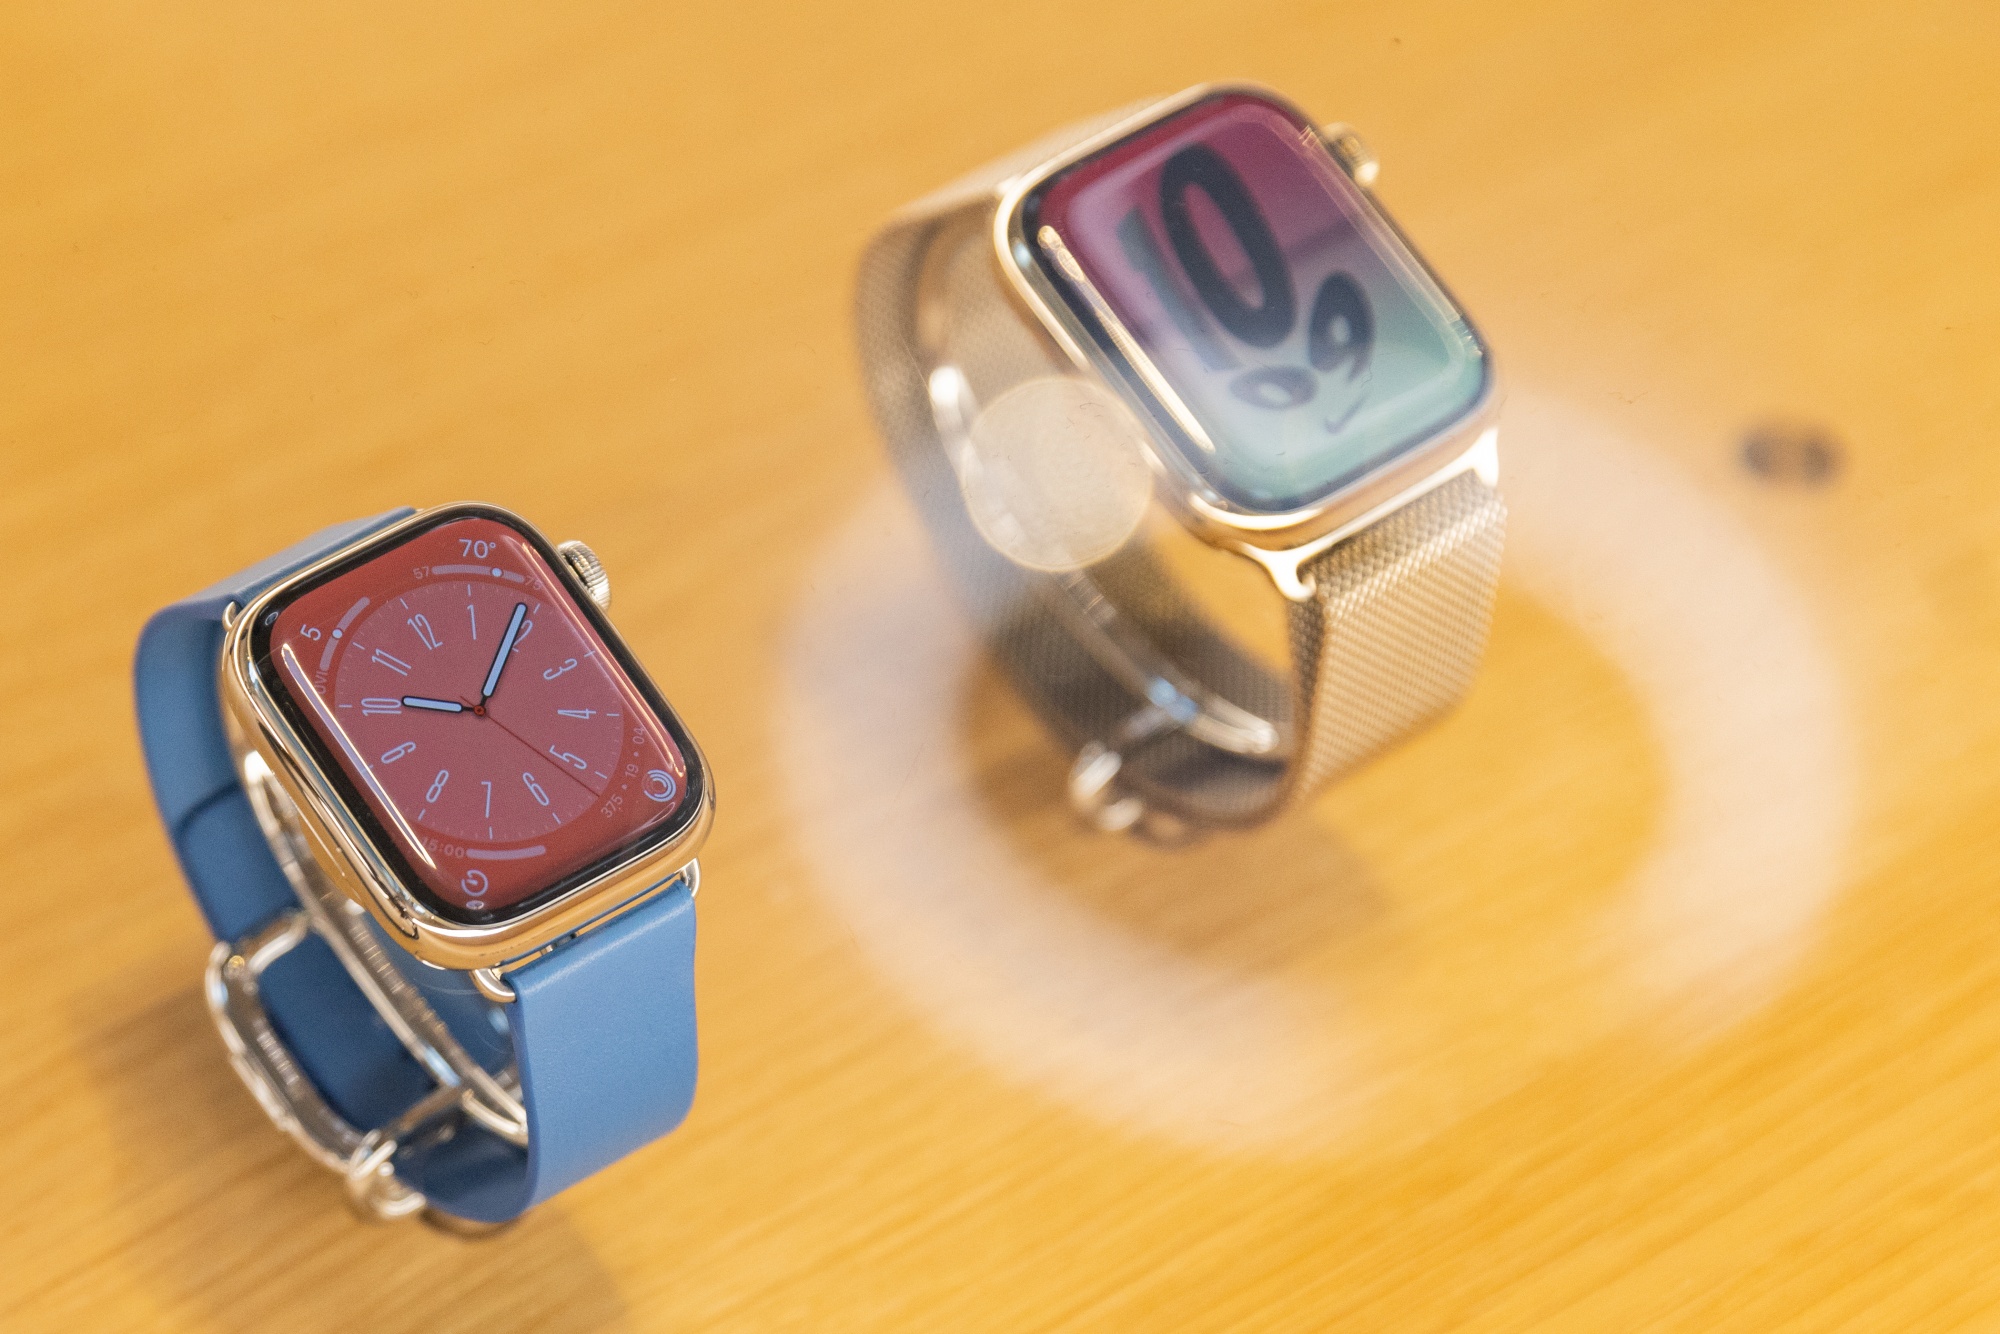 Apple's plan to add a blood-pressure monitor to its smartwatch hit by delay